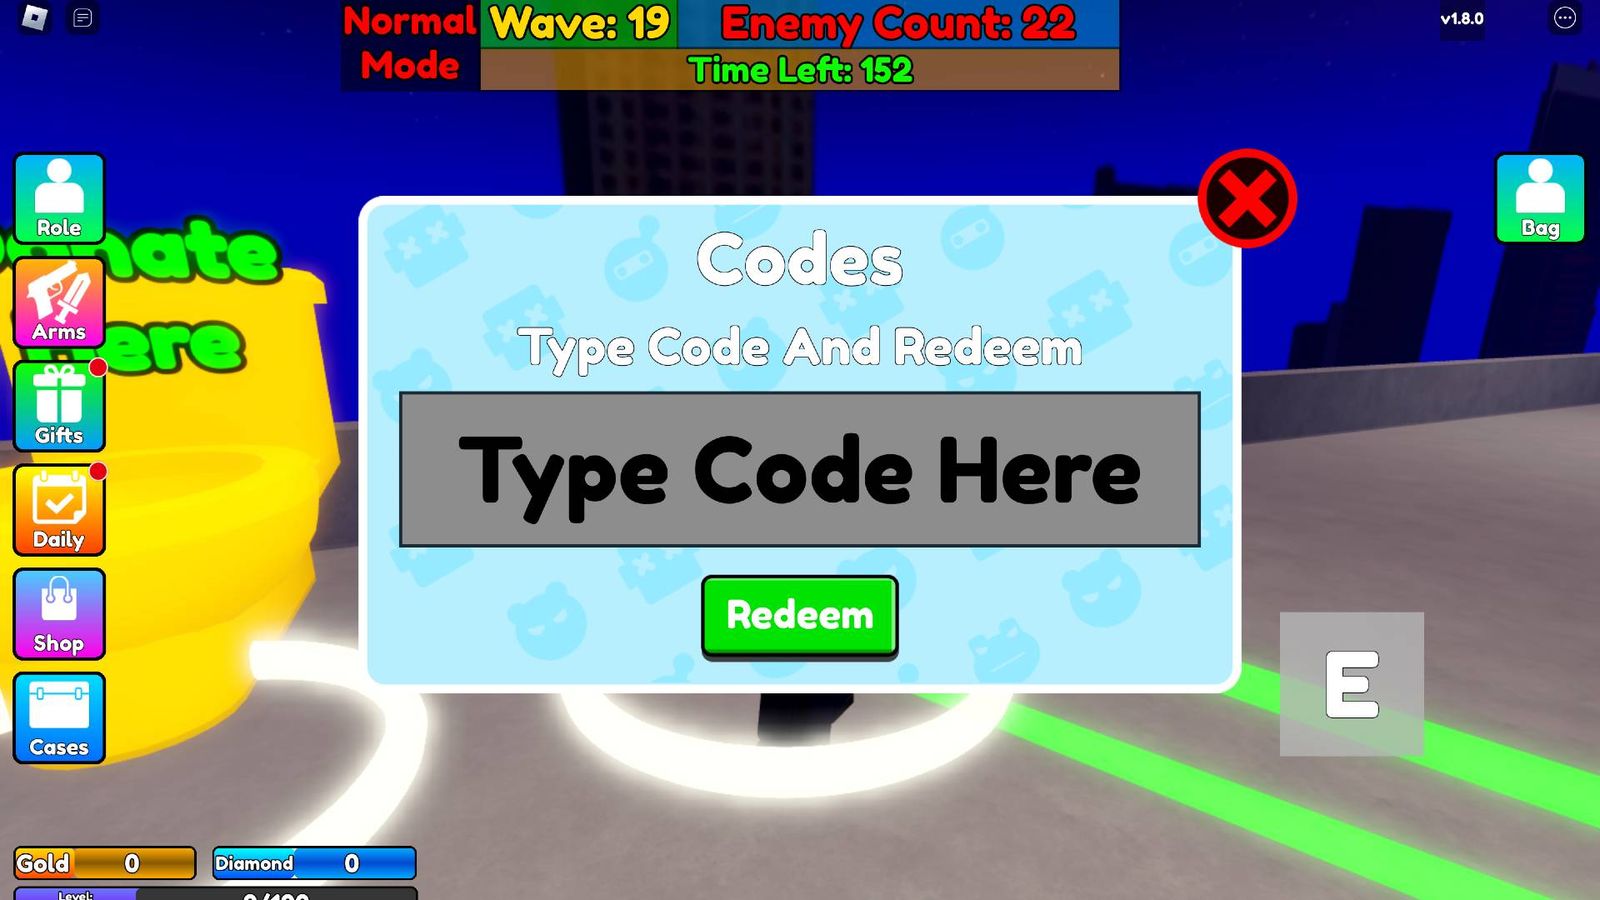 The code redemption screen in Toilet Attack on Roblox.